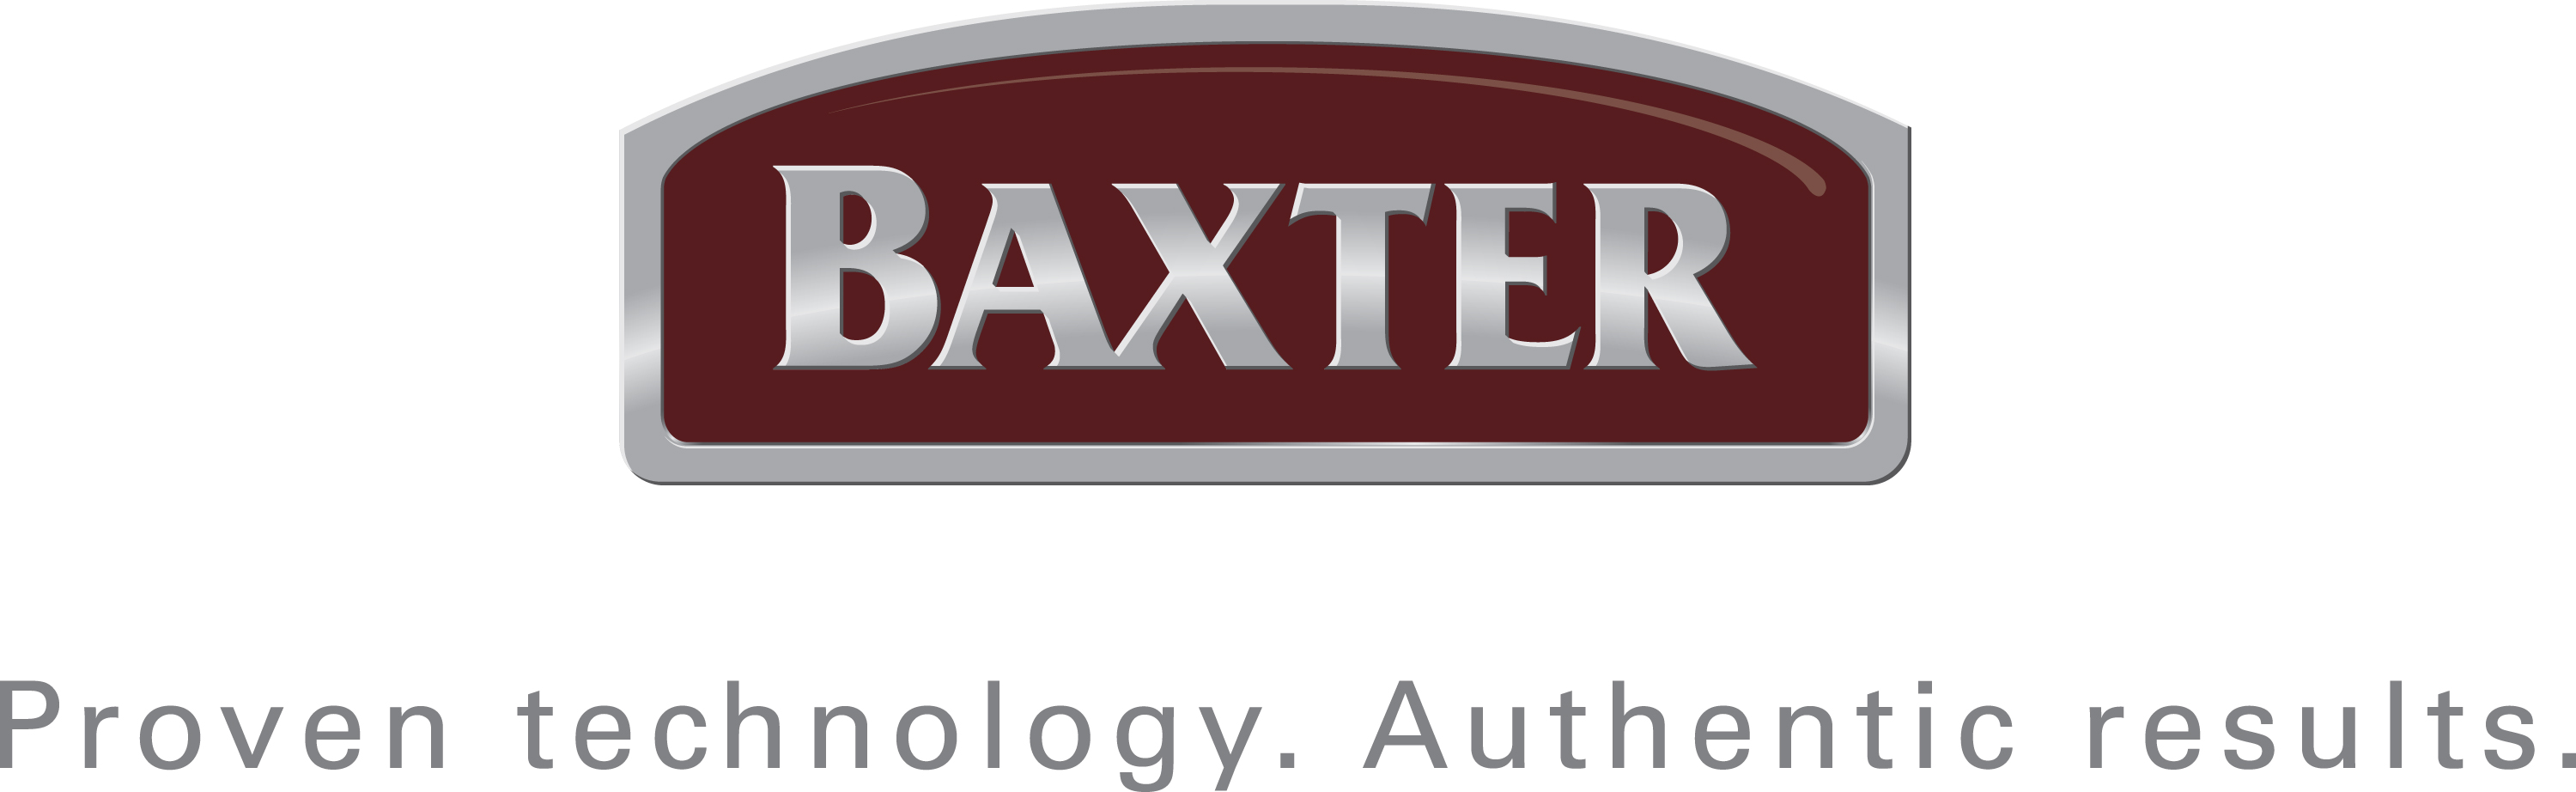 Commercial Ovens & Bakery Equipment | Baxter